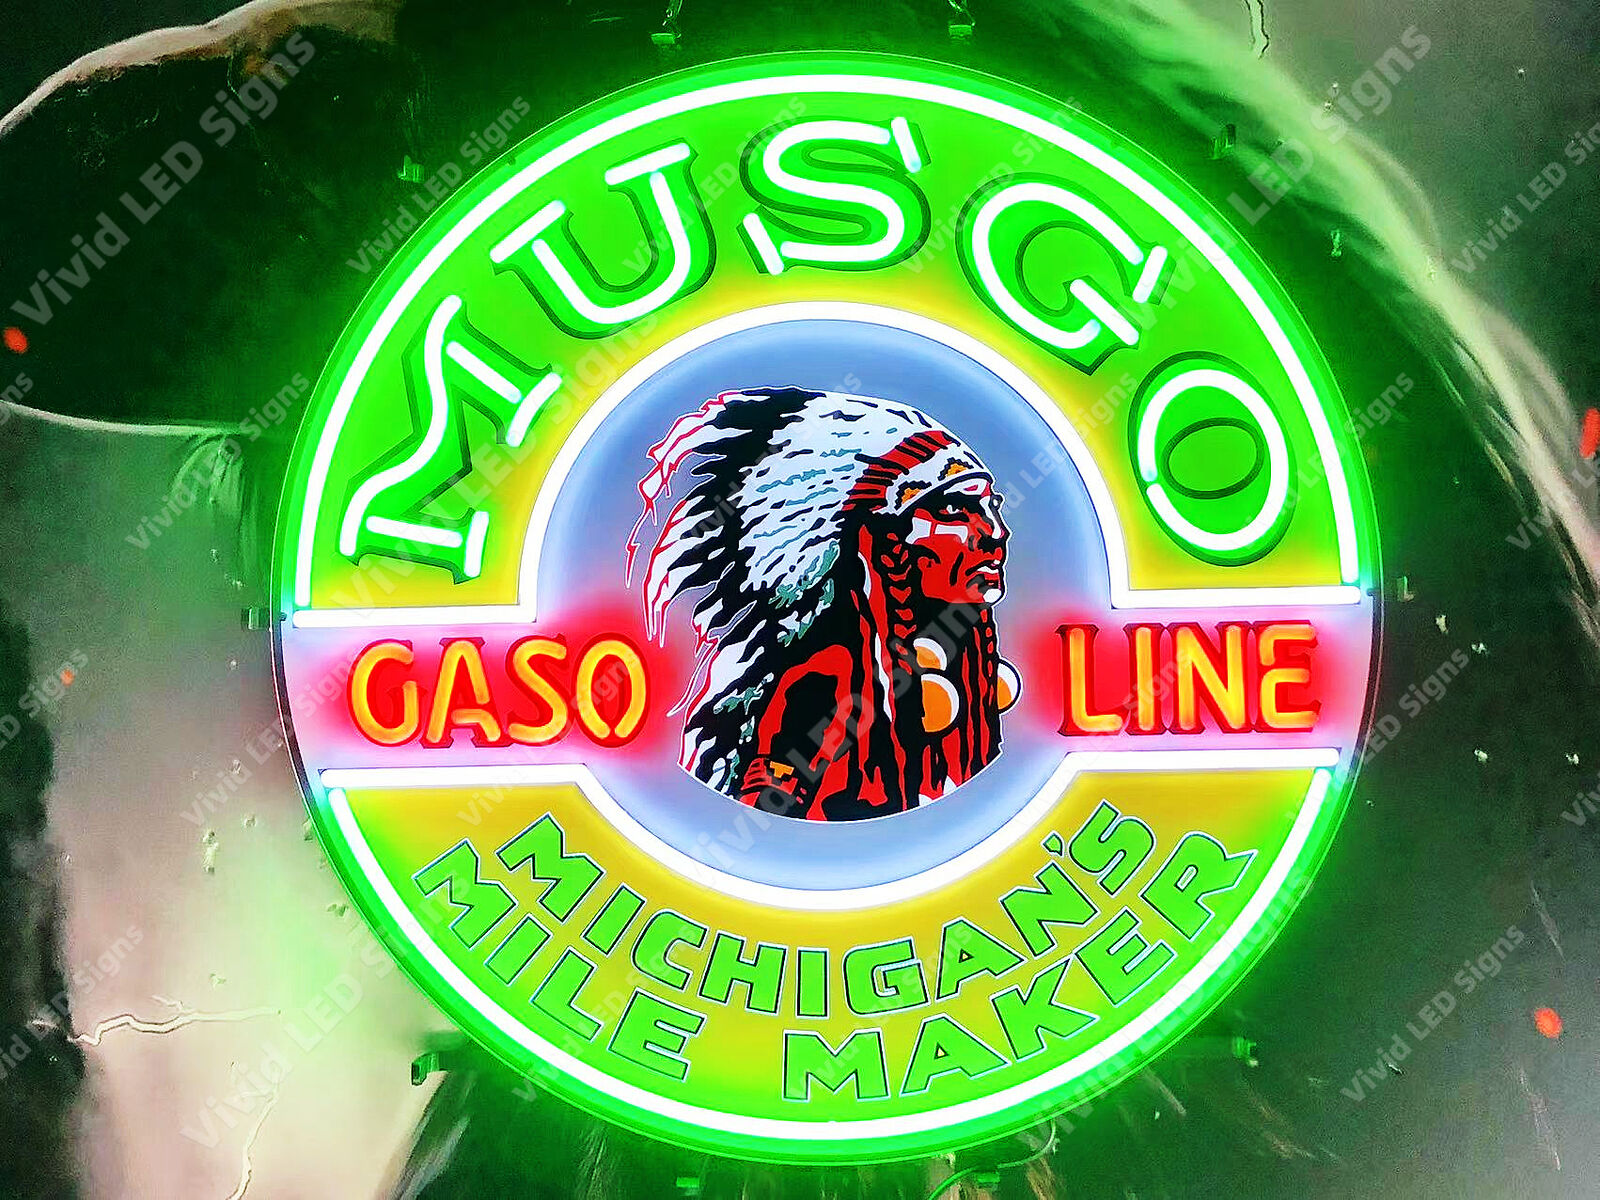 Musgo Indian Gasoline Gas Oil Fuel Vivid LED Neon Sign Light Lamp With Dimmer